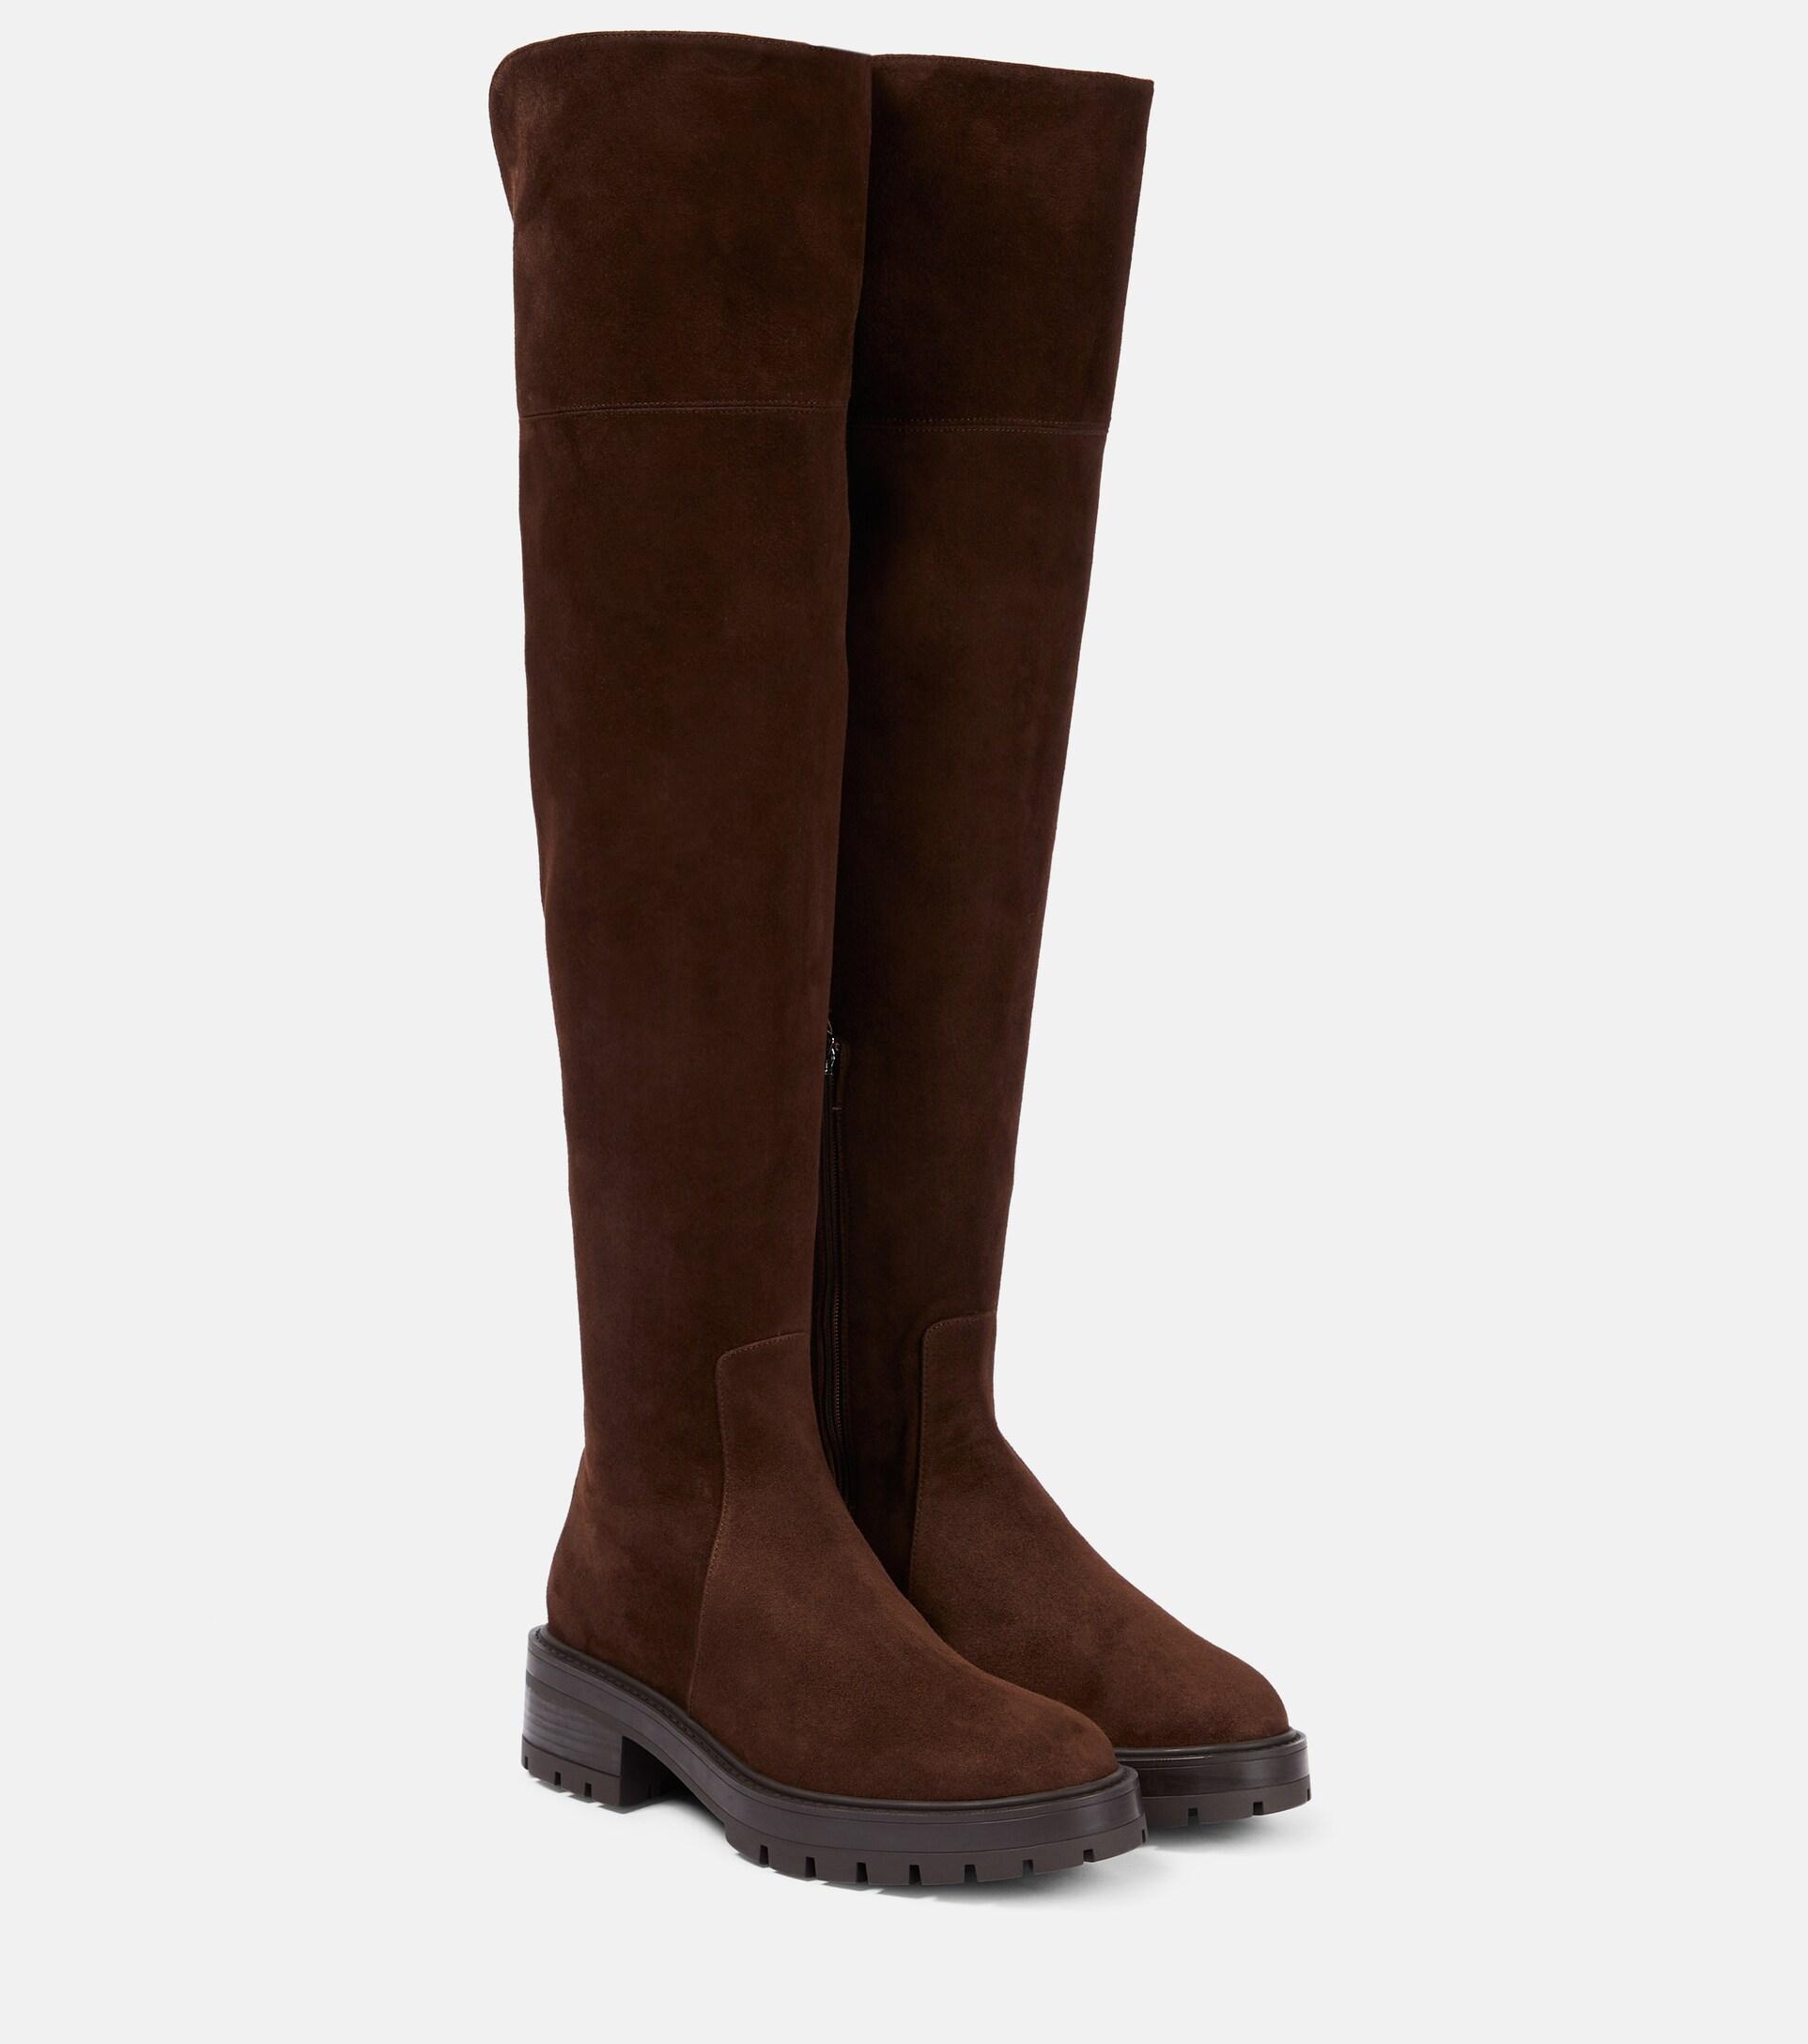 Aquazzura Whitney Suede Knee-high Boots in Brown | Lyst